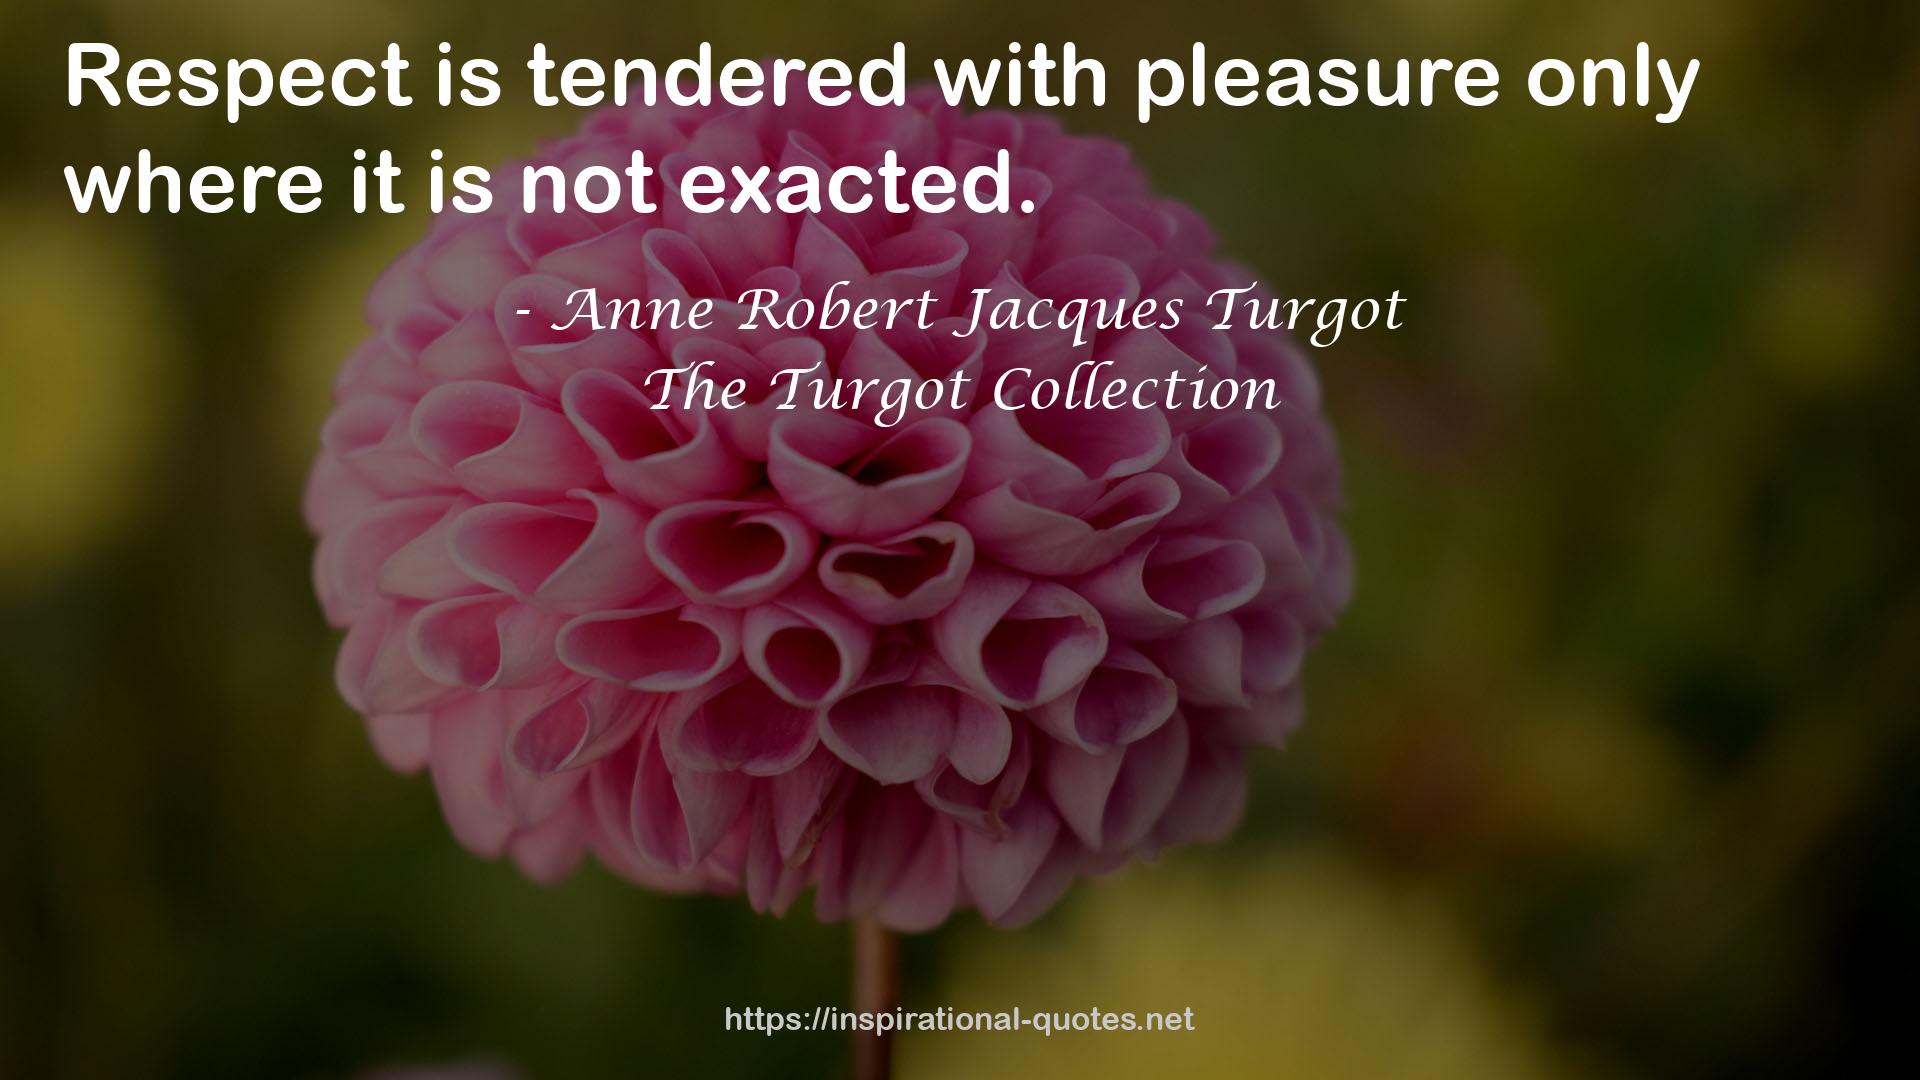 The Turgot Collection QUOTES